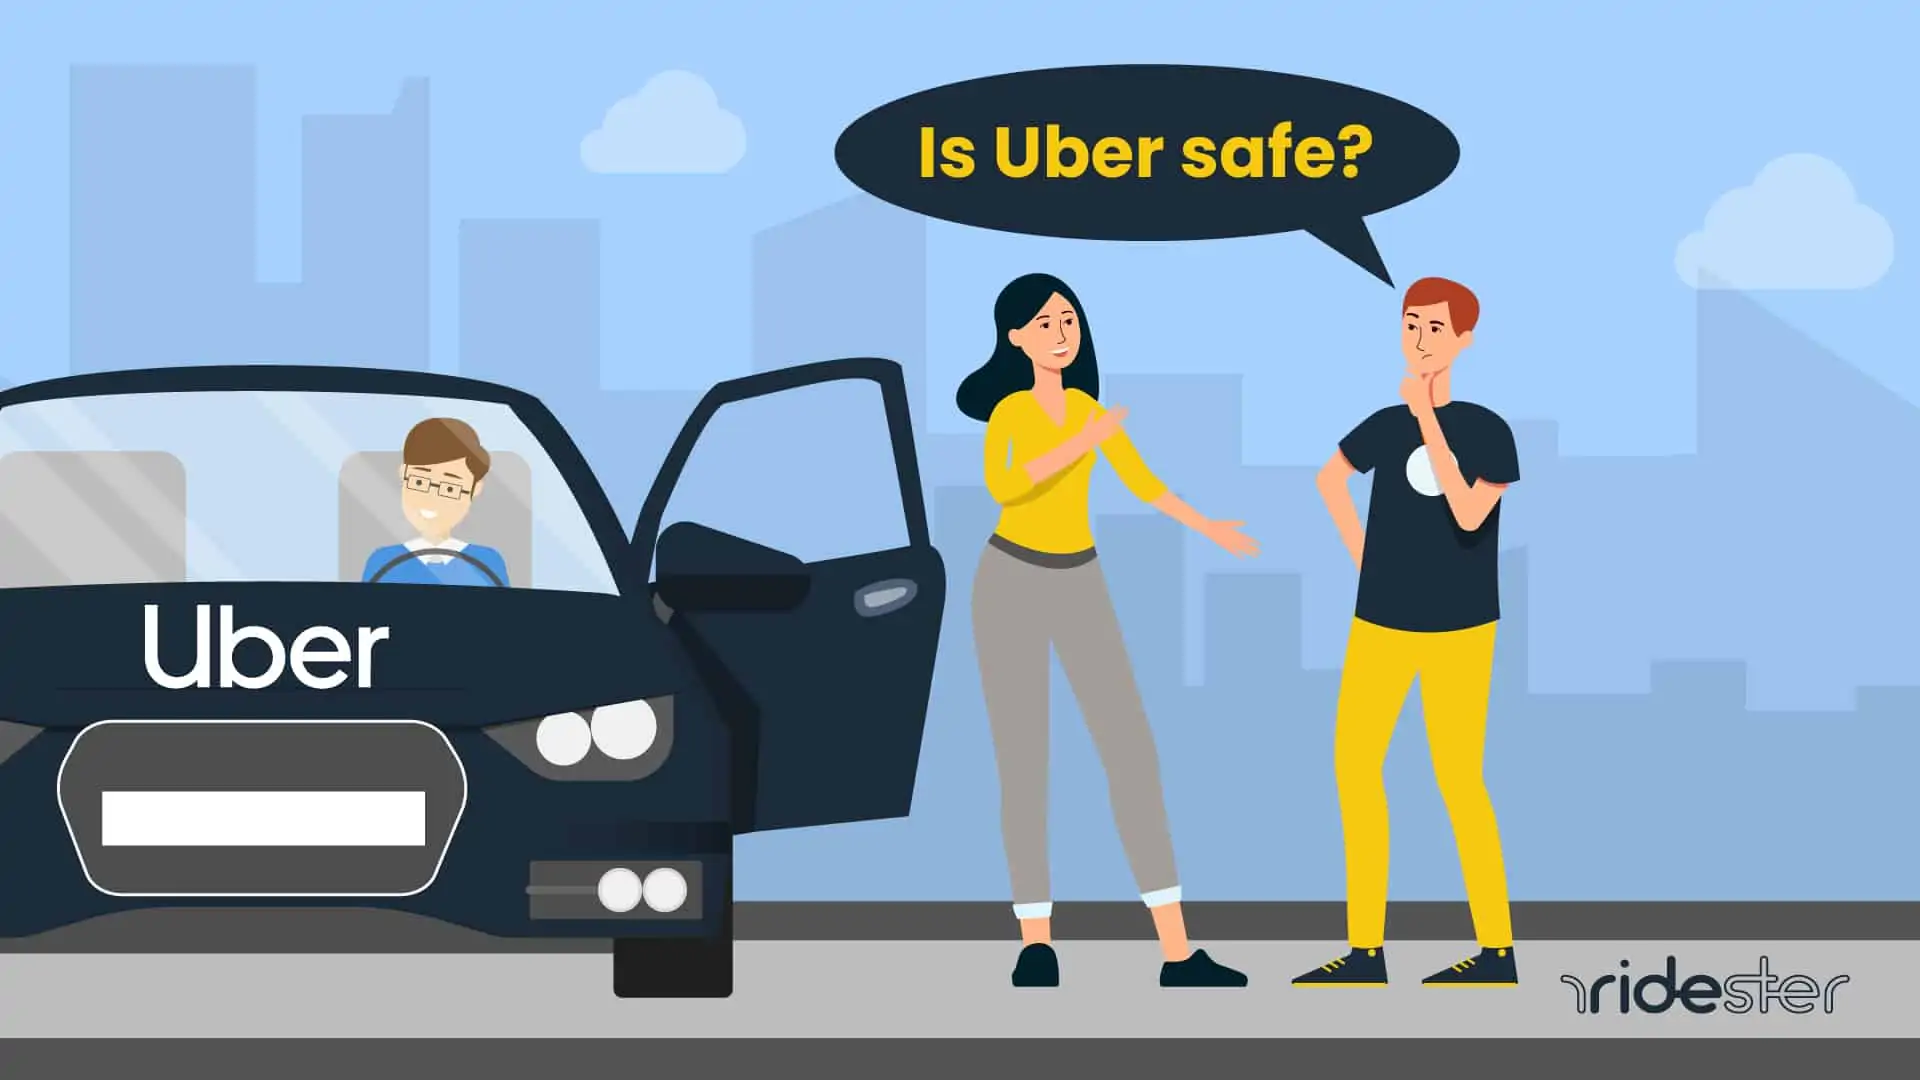 vector graphic showing man asking woman "Is Uber safe?" before getting into a waiting Uber vehicle